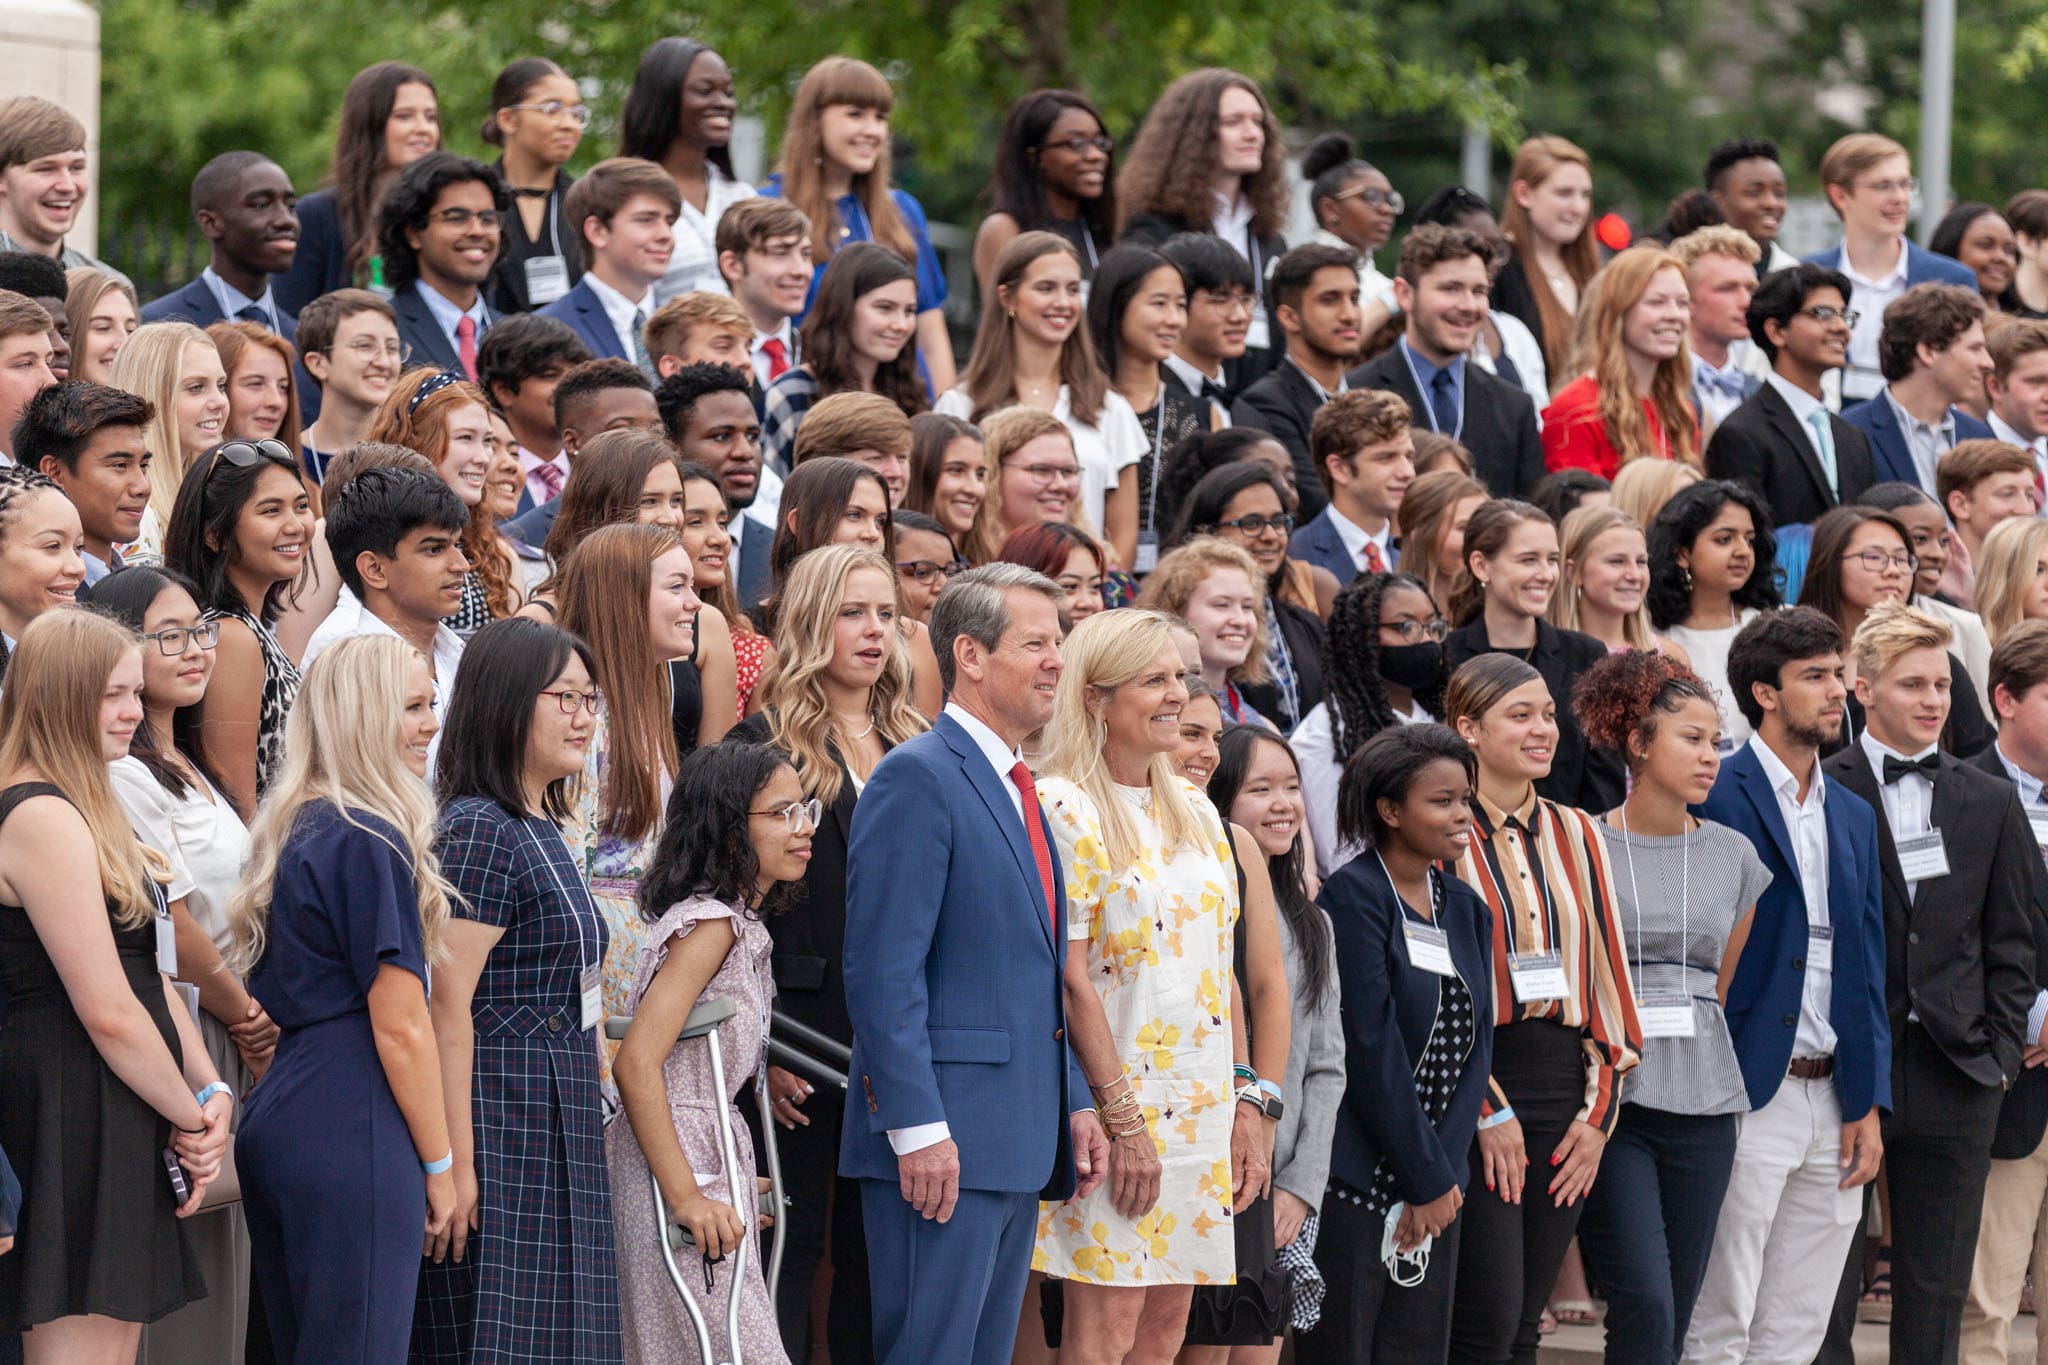 Georgia-Governor-Brian-Kemp-and-First-Lady-Marty-Kemp-posing-with-hundreds-of-Georgia-high-school-valedictorians-in-Liberty-Plaza-next-to-The-Georgia-State-Capitol